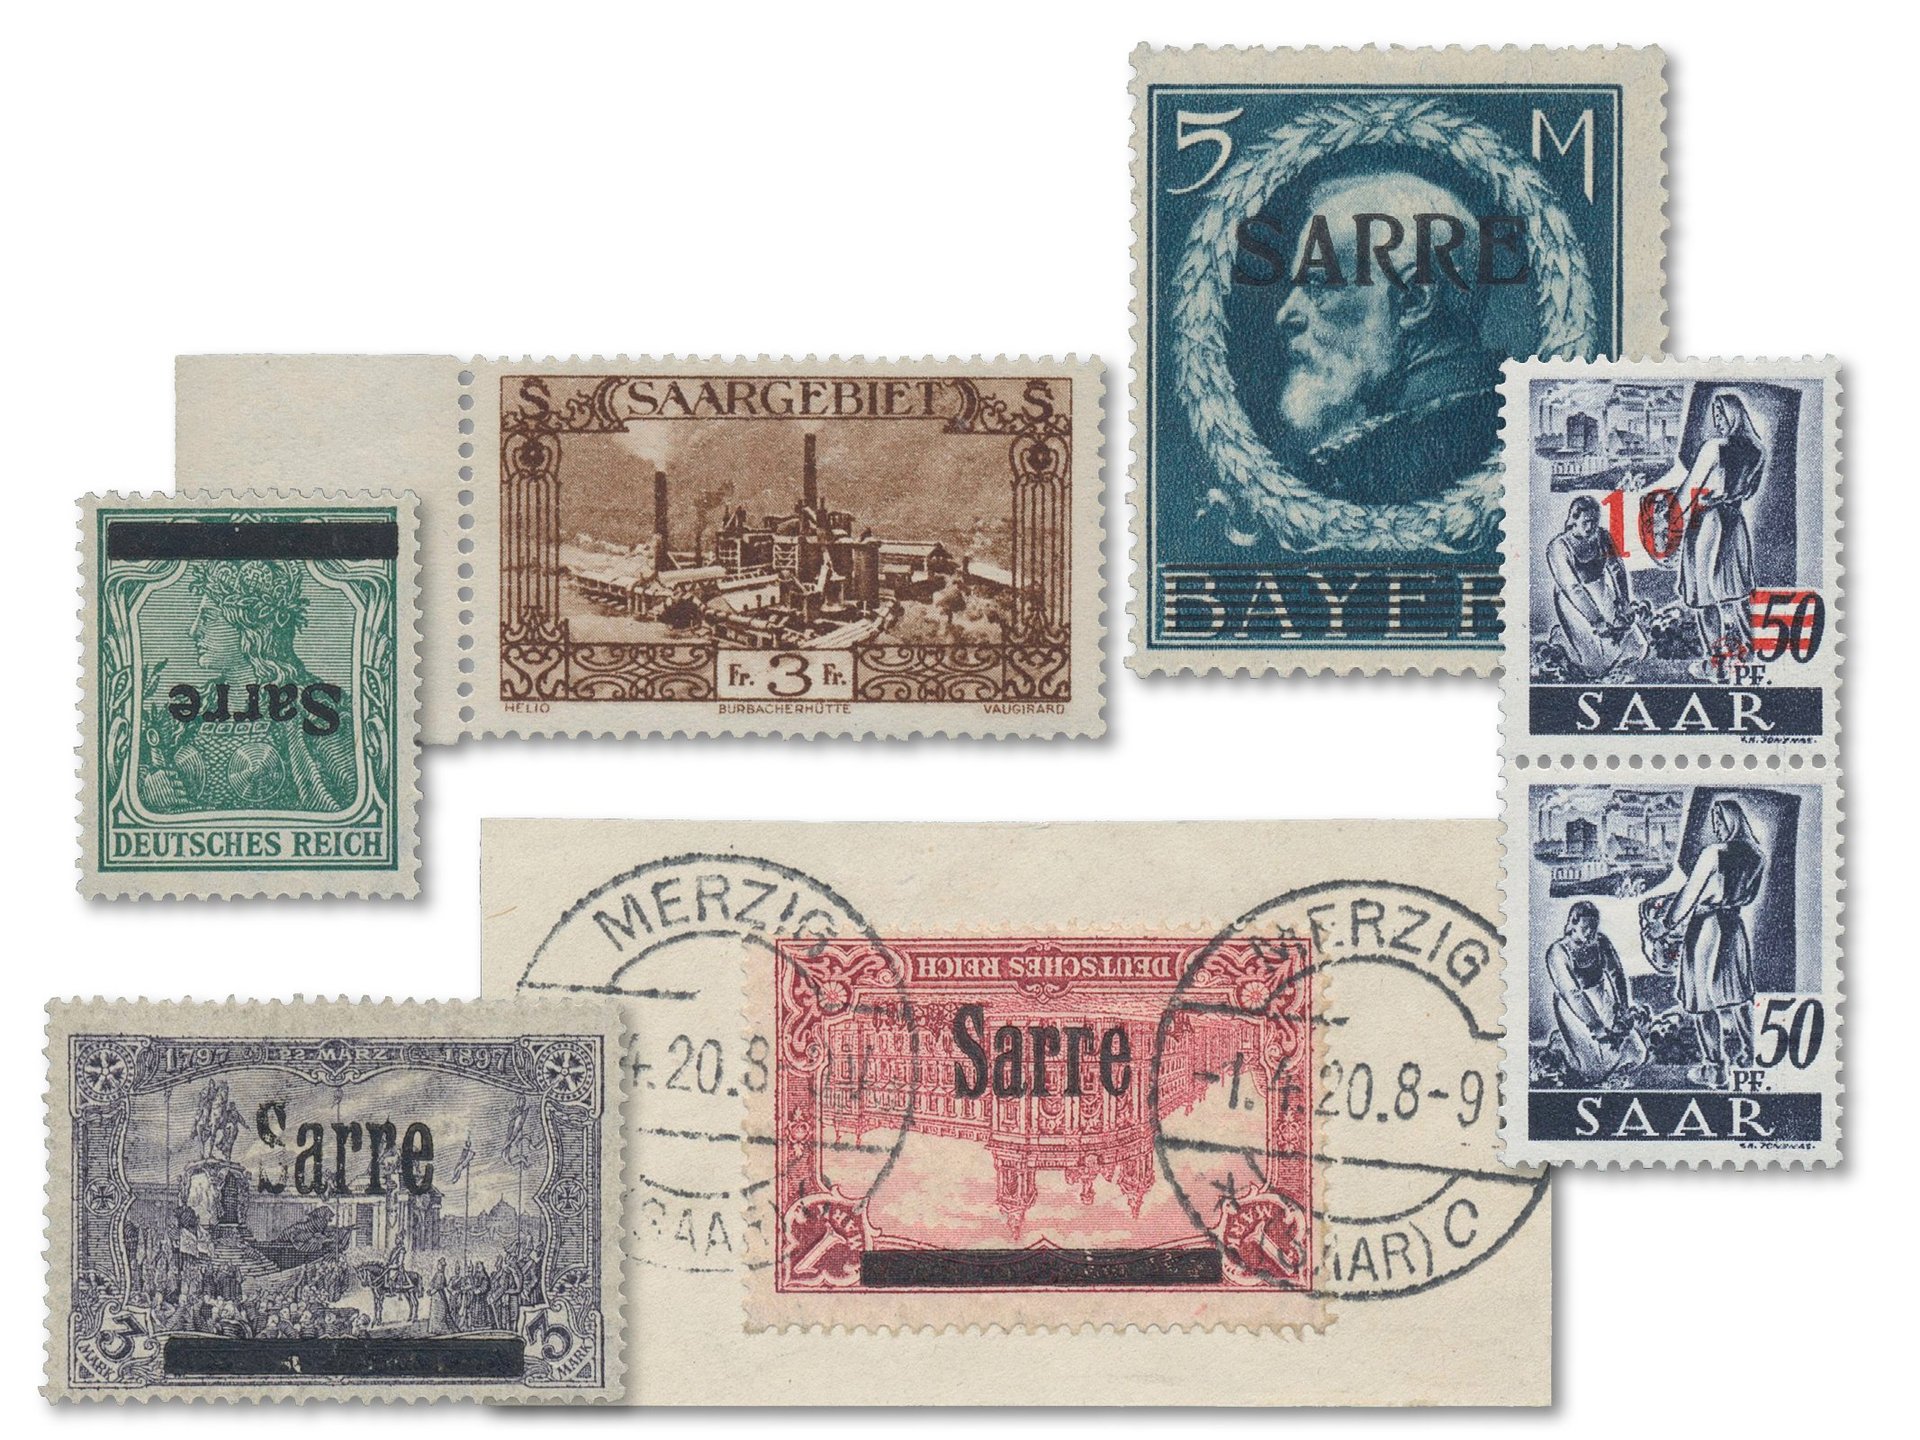 single, very rare, stamps from the Saar area, Sarre